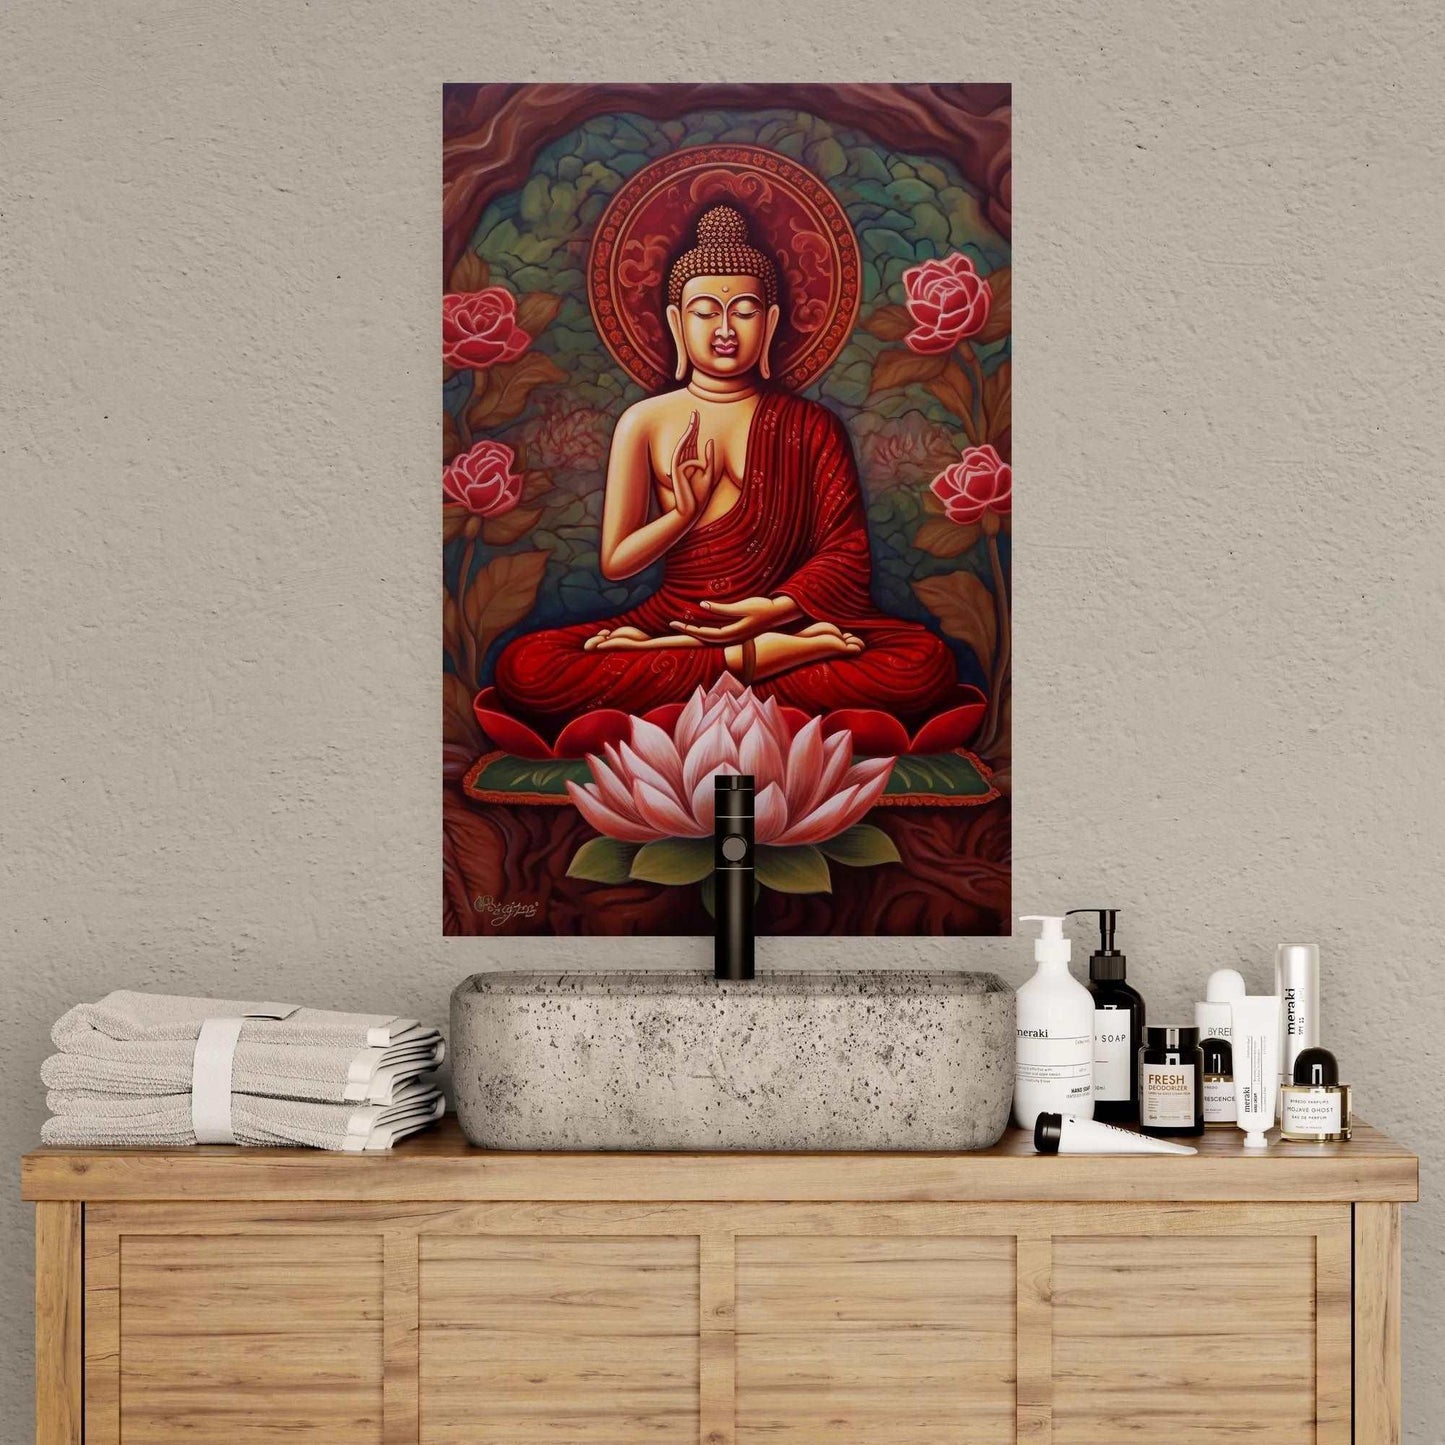 A traditional Buddha painting in rich red and gold tones featuring a seated Buddha and a pink lotus, against a floral backdrop, placed above a wooden console with towels and skincare products.